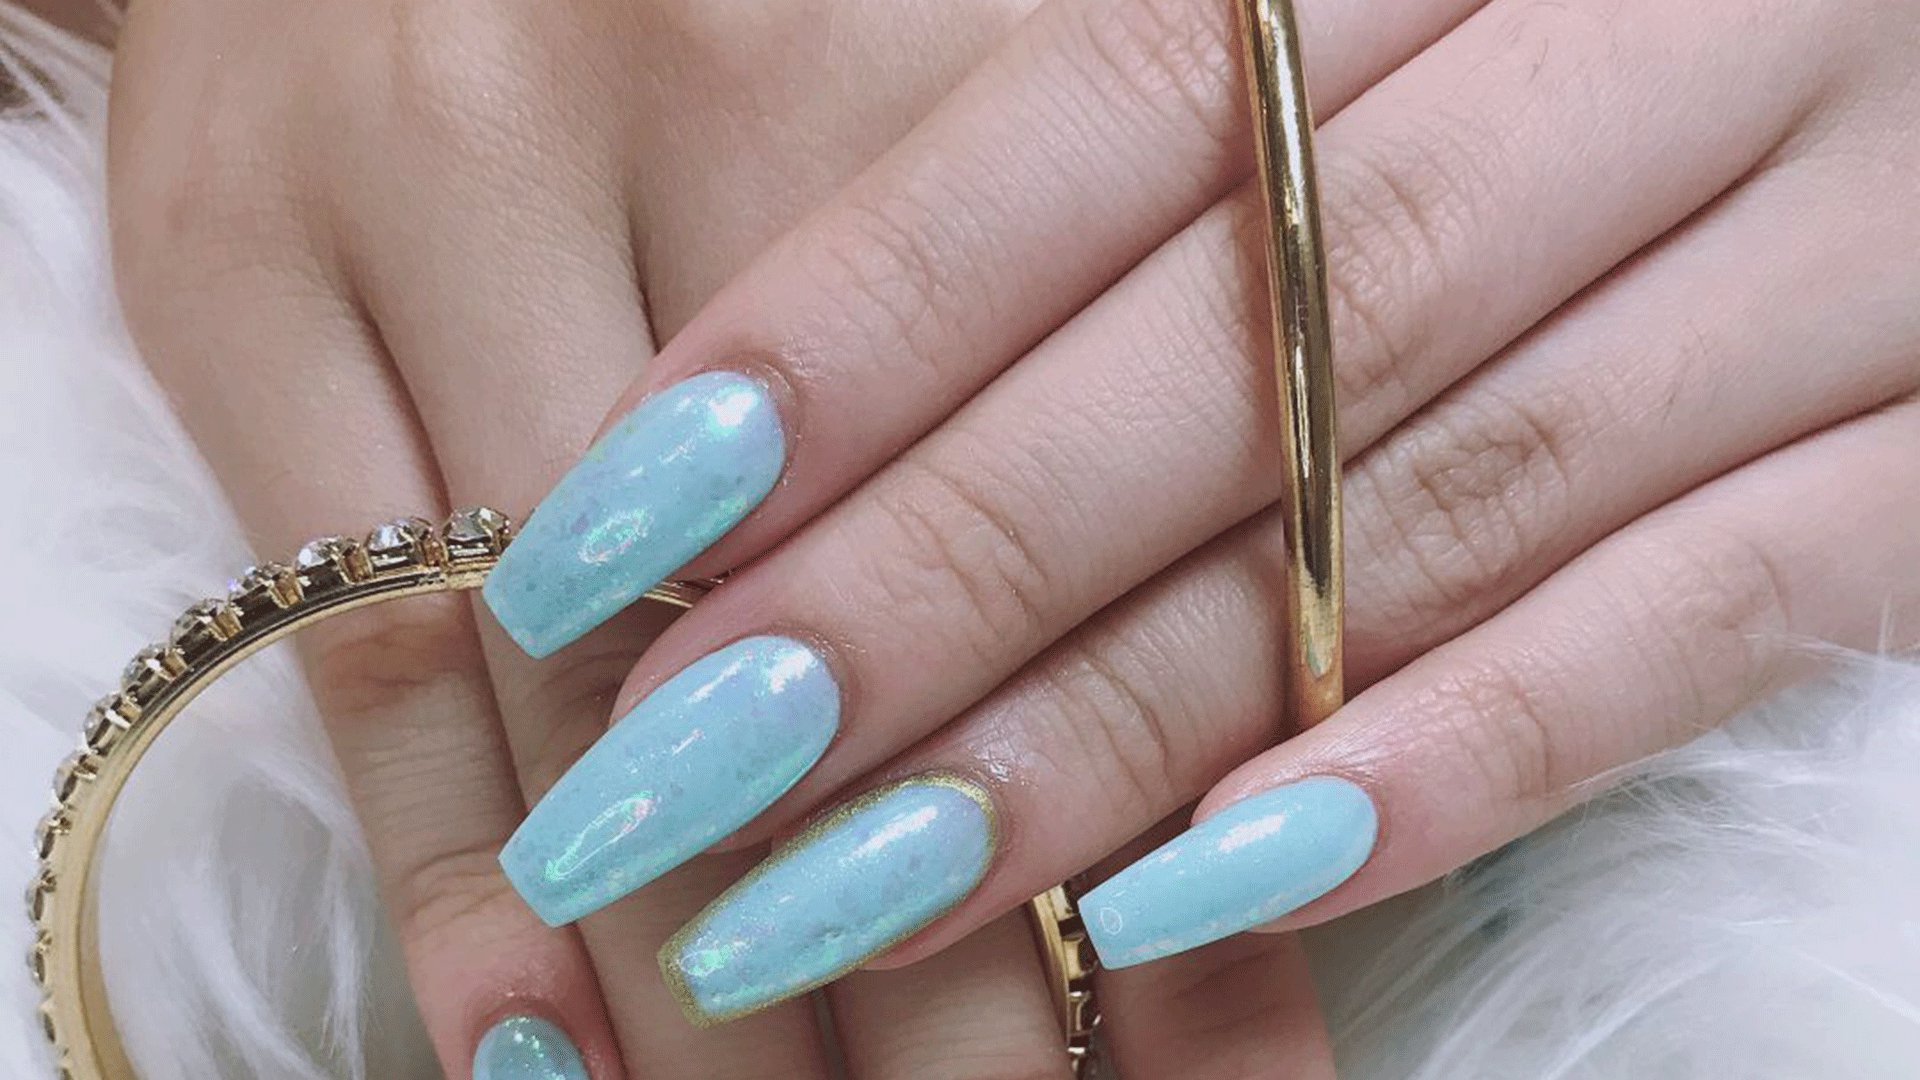 7. "The Hottest Summer Nail Colors on Tumblr Right Now" - wide 5